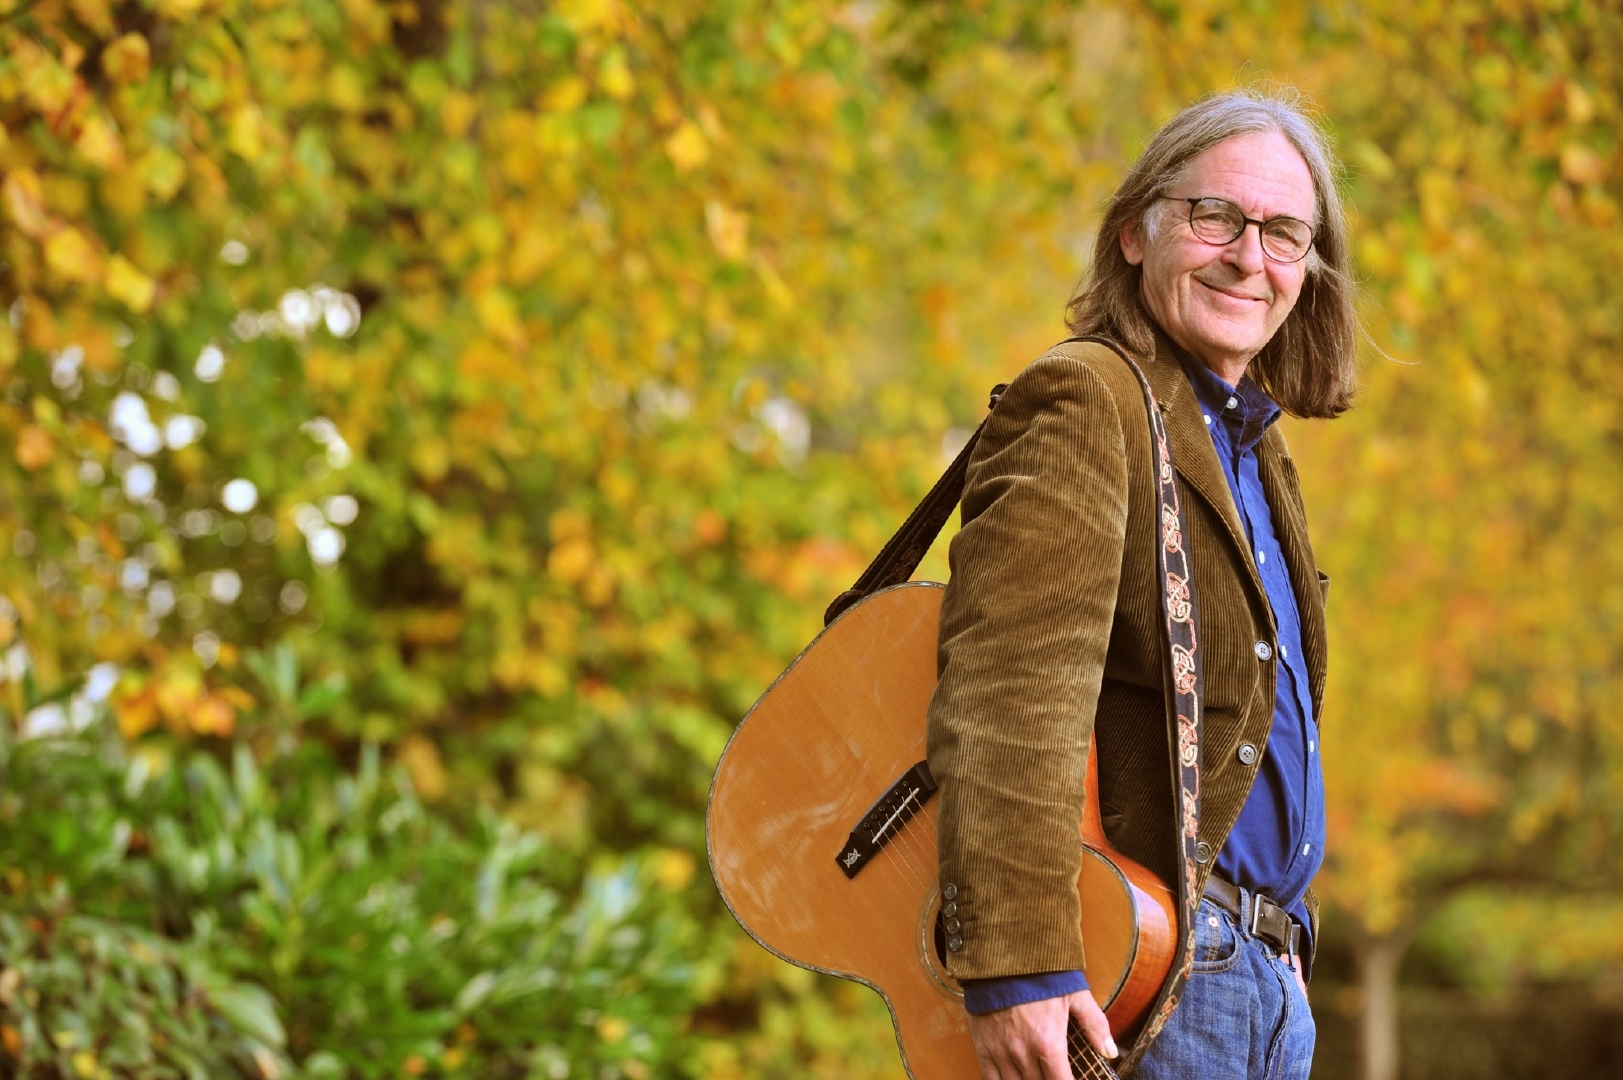 Perthshire Amber, run by Dougie MacLean and family, is on this weekend.